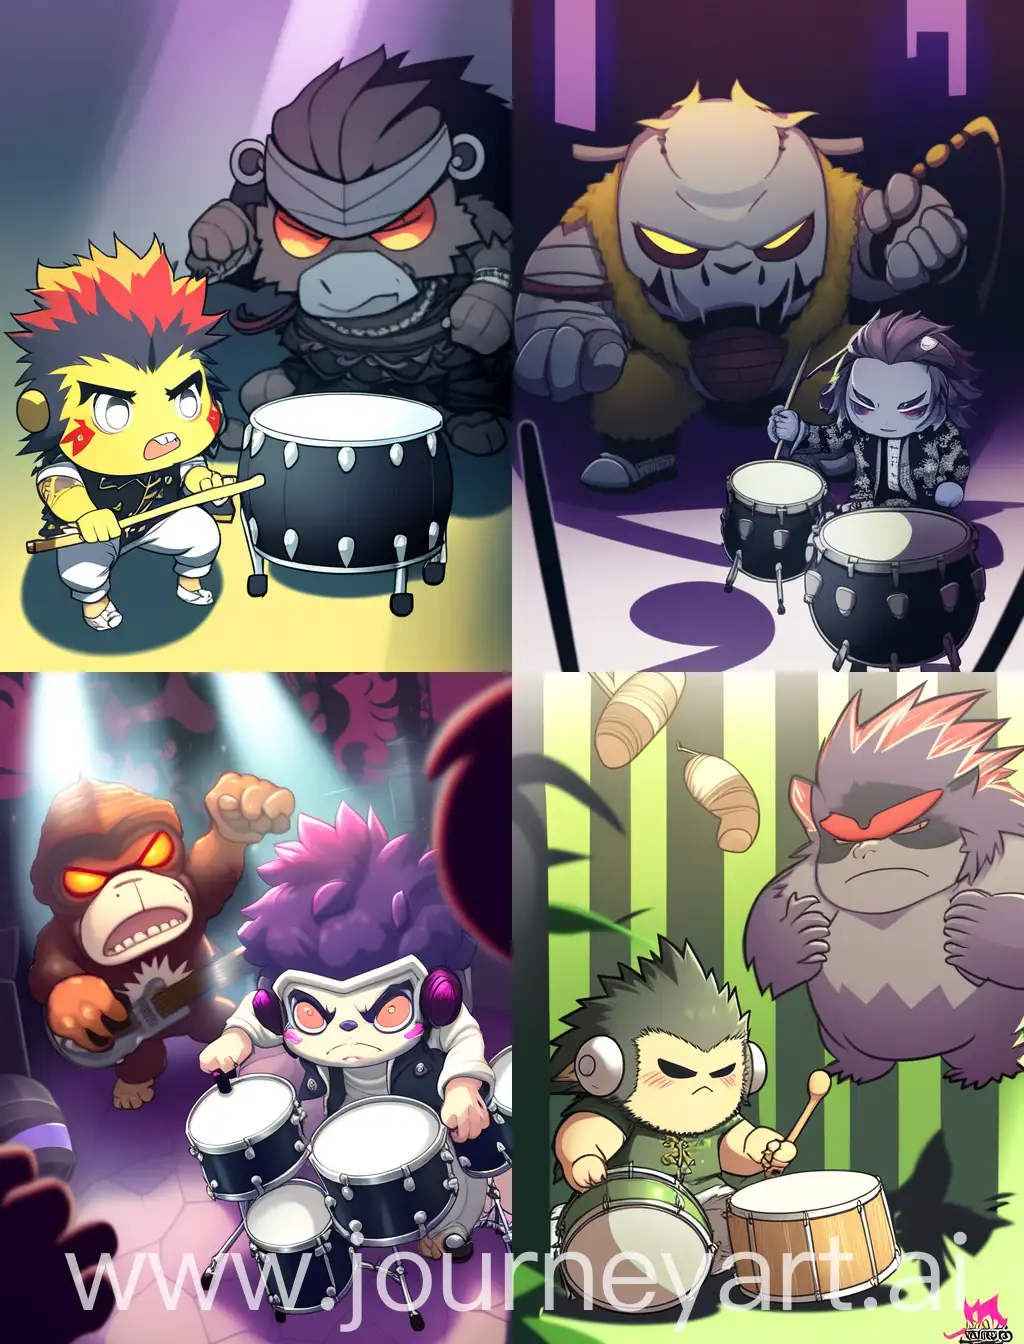 chibi gorilla and anime guy playing drums, with spooky background, 